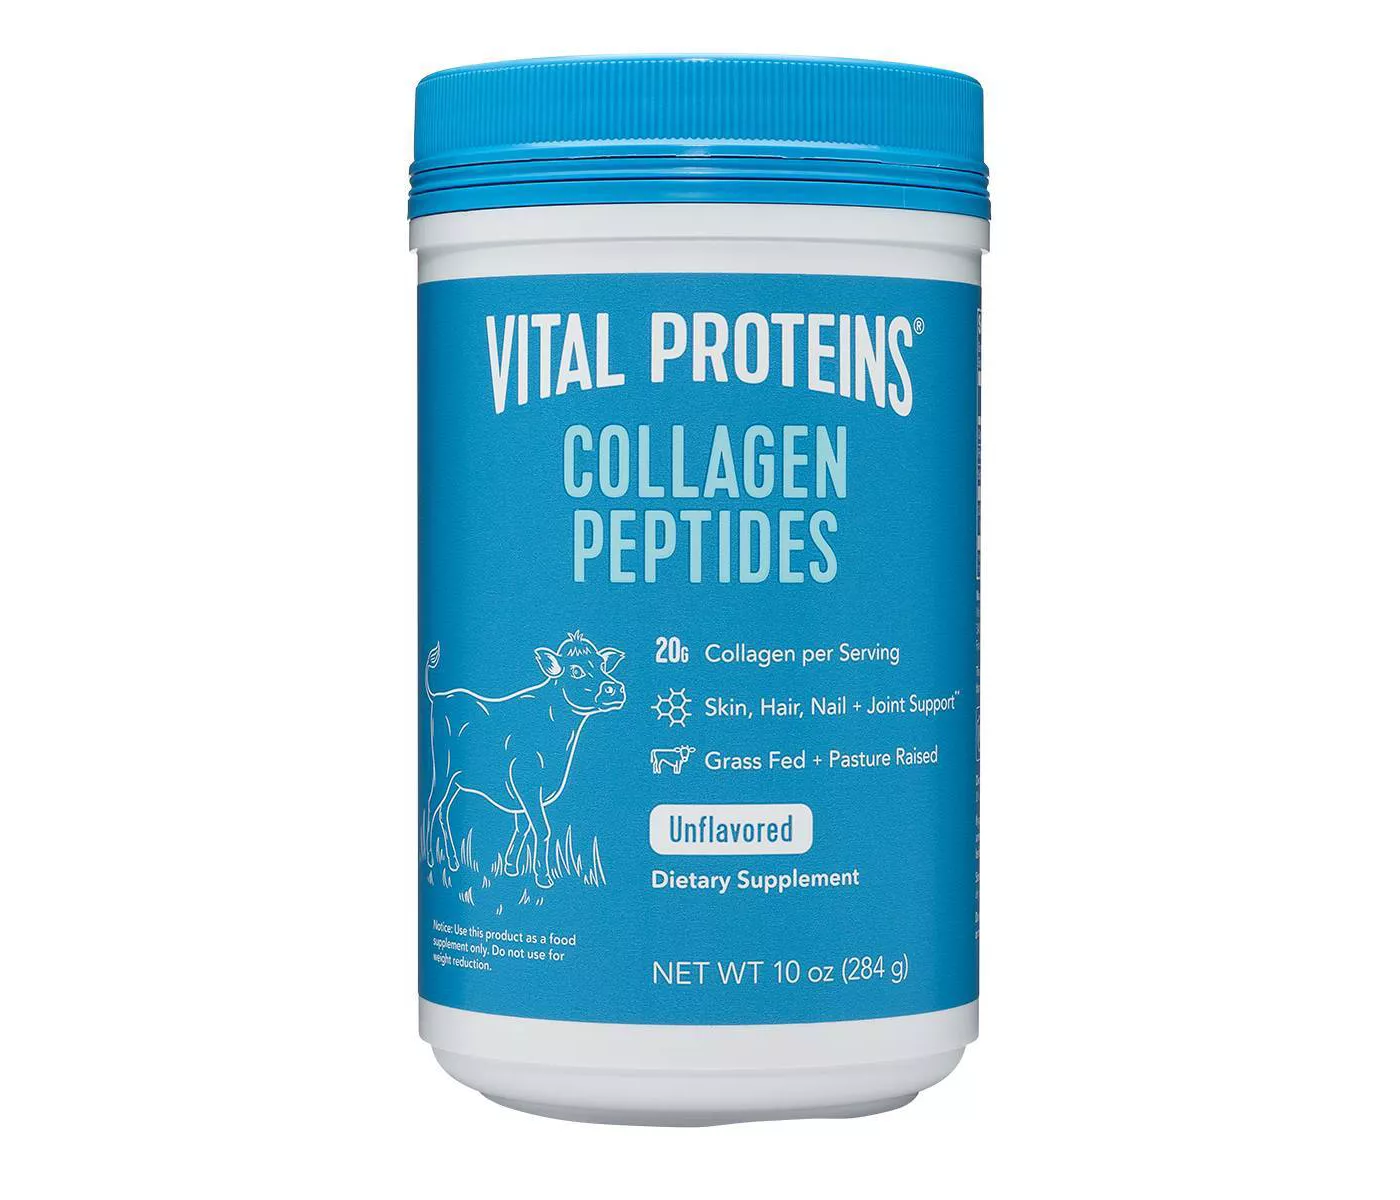 Vital Proteins Collagen Peptides Dietary Supplements - 10oz - image 1 of 5